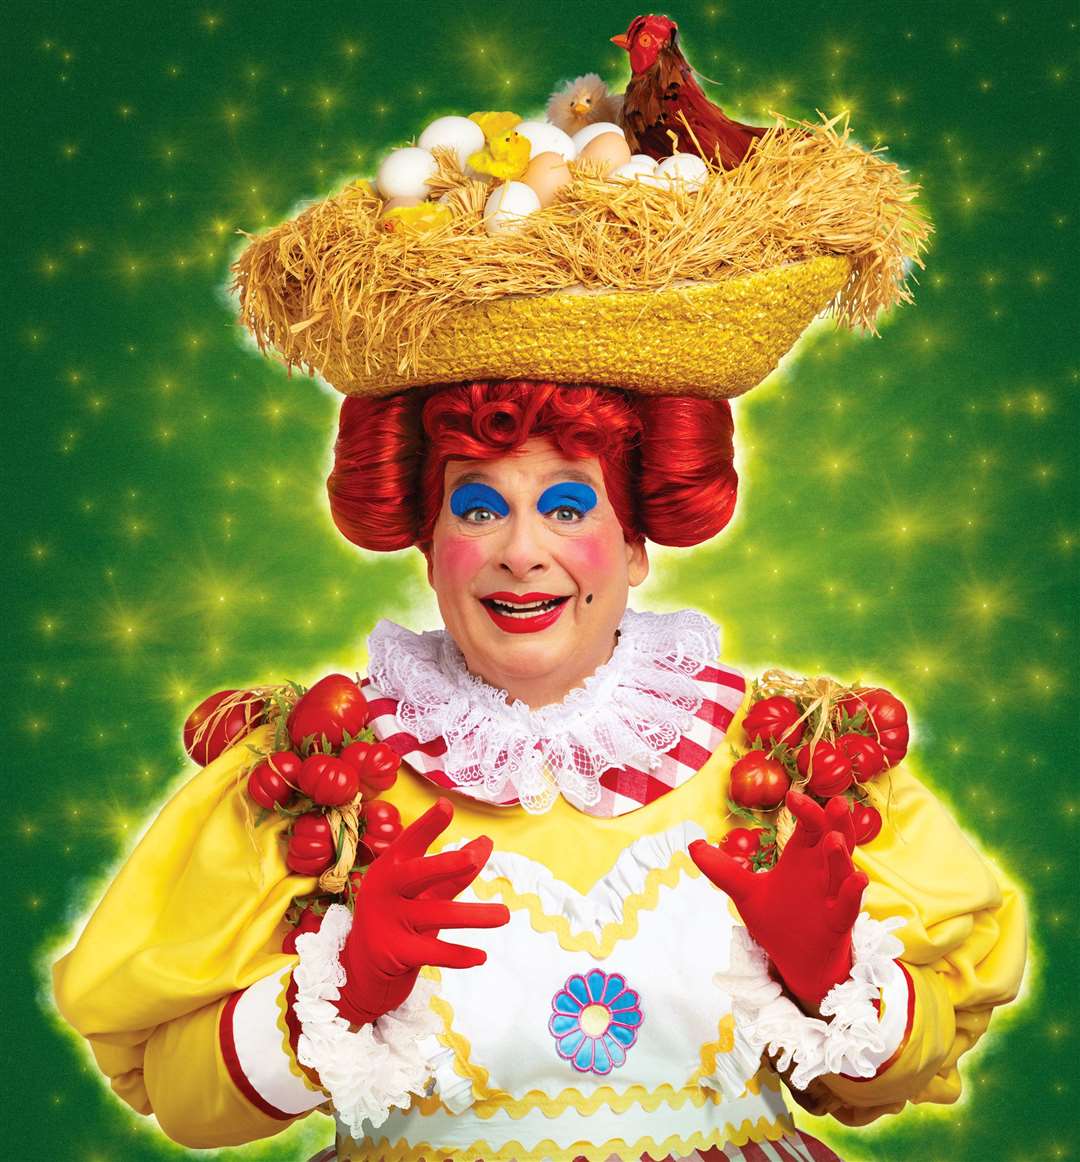 Christopher Biggins is expected to star in this year's pantomime at the Dartford Orchard Theatre